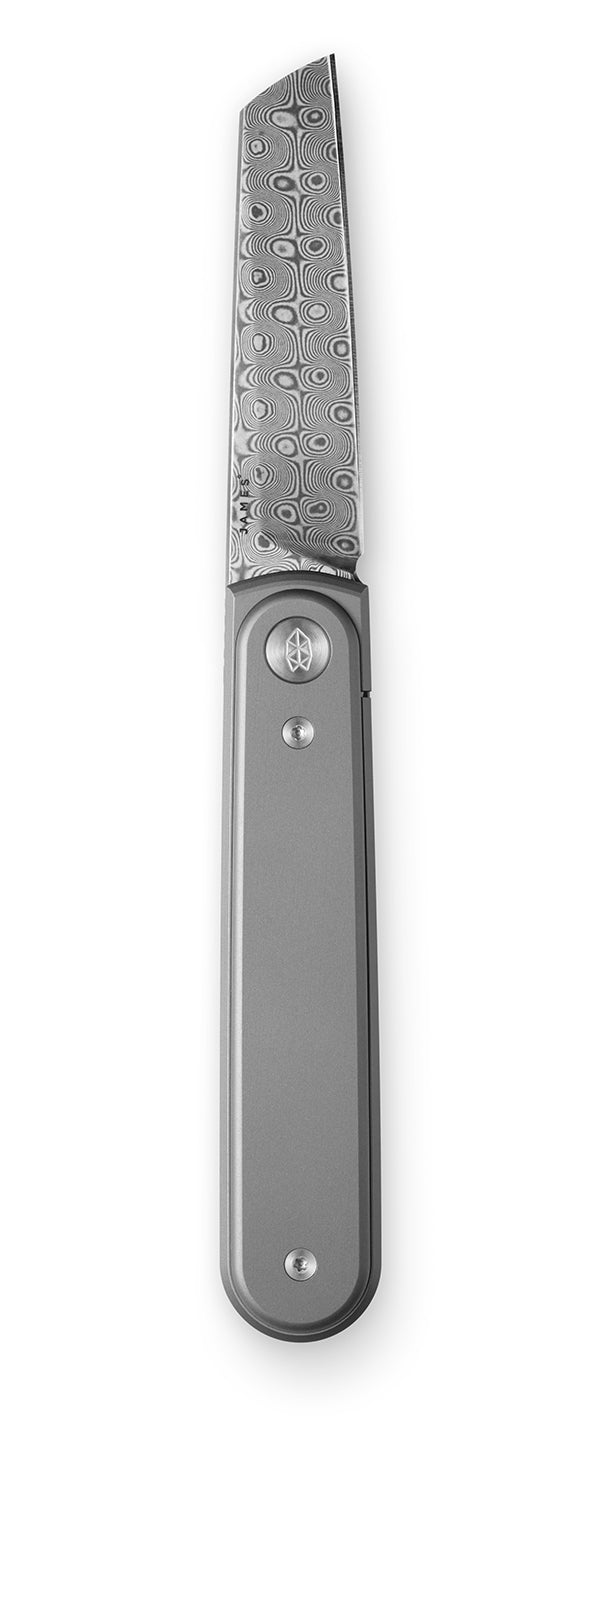 The Duval knife, fully opened with the blade visible.